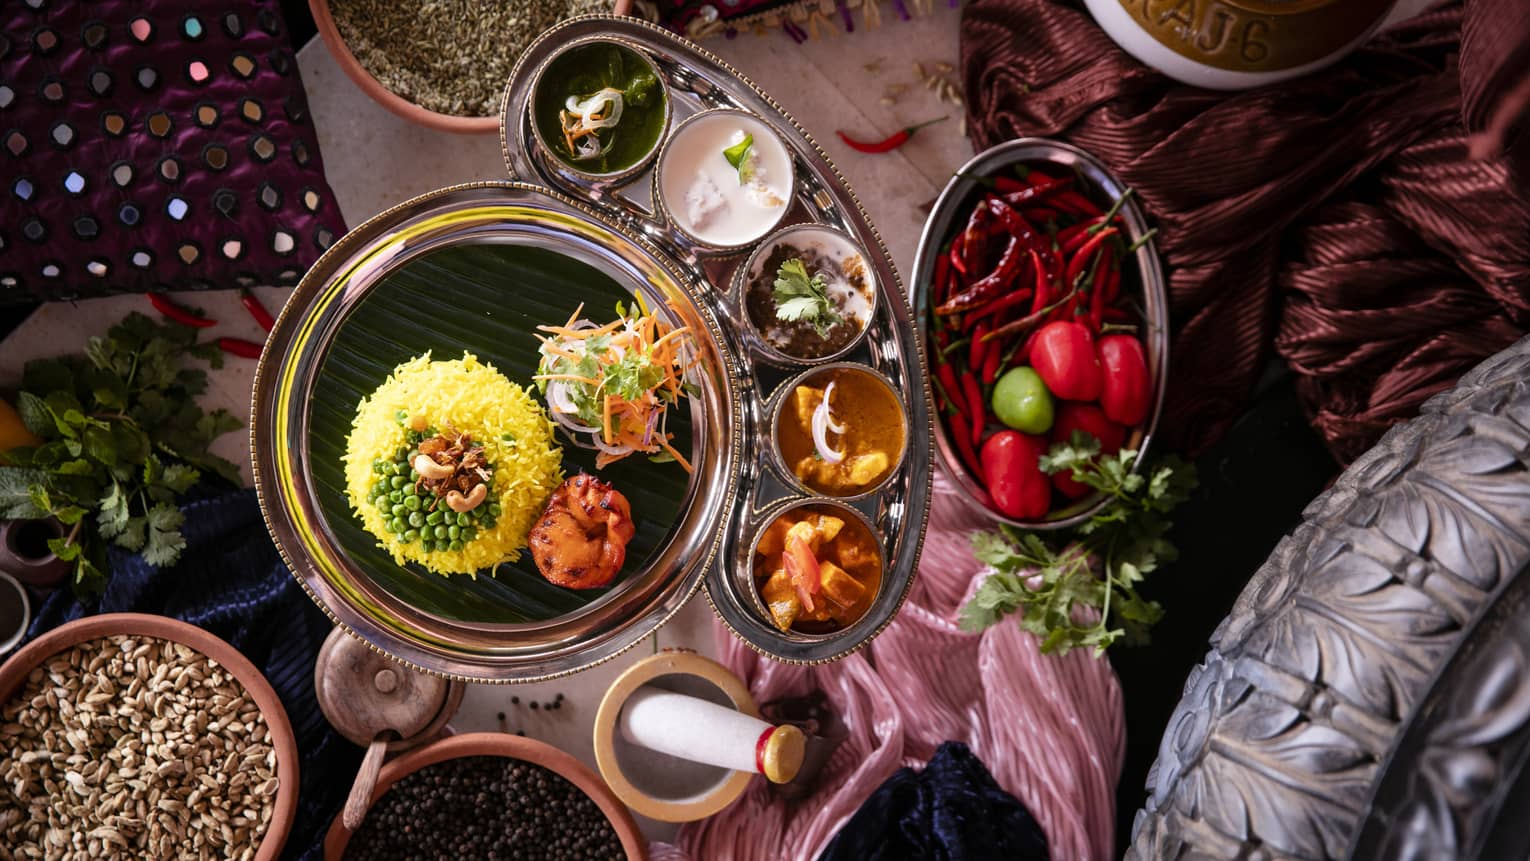 Aerial view of curry dish with rice, bowls of condiments and mortar and pestle